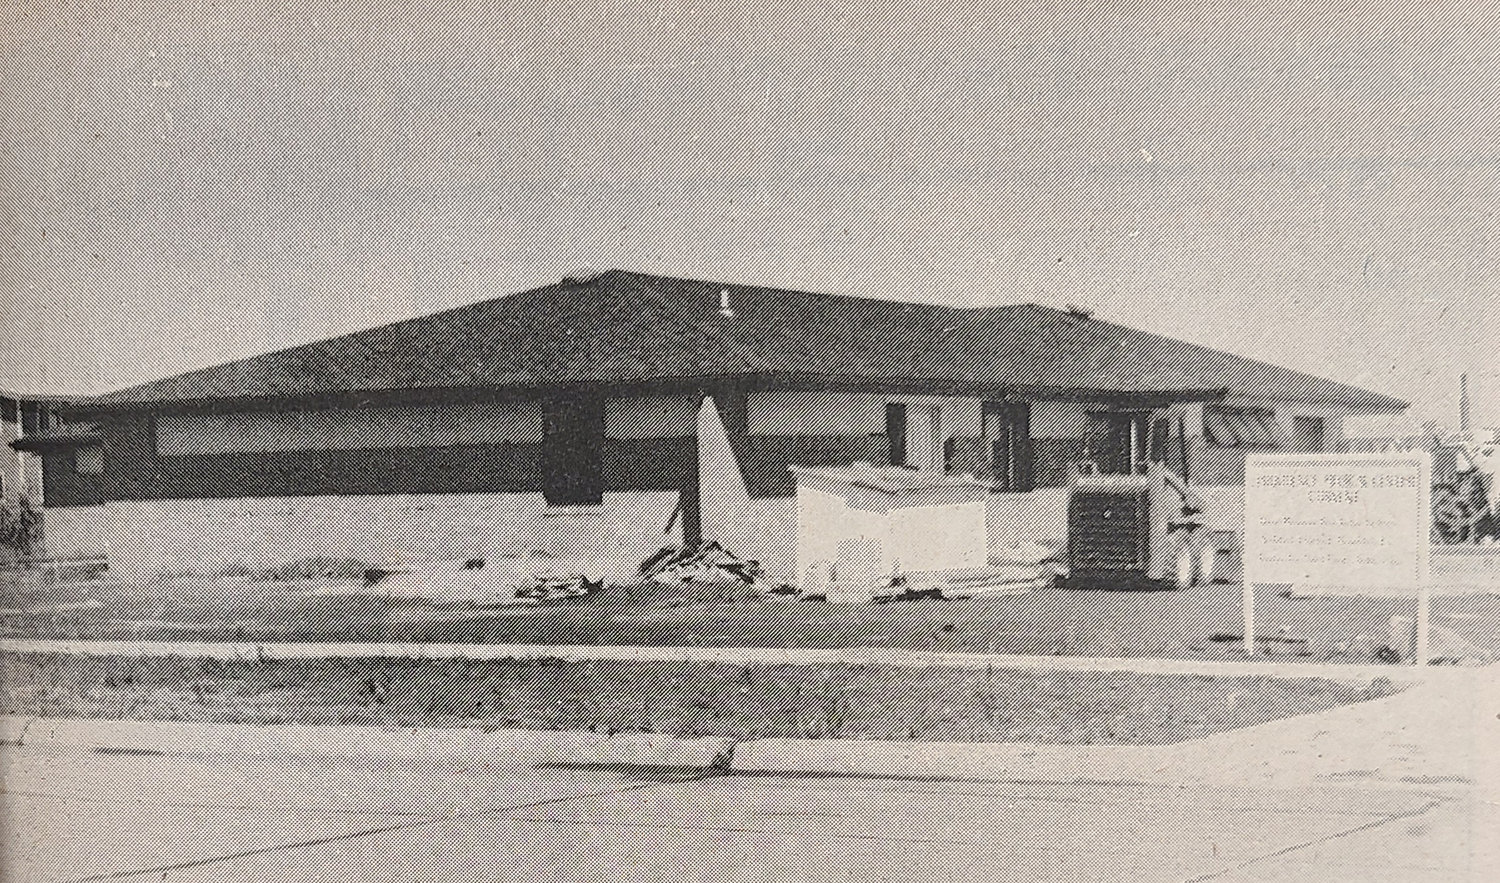 10-8-1981 - New Convent Completed